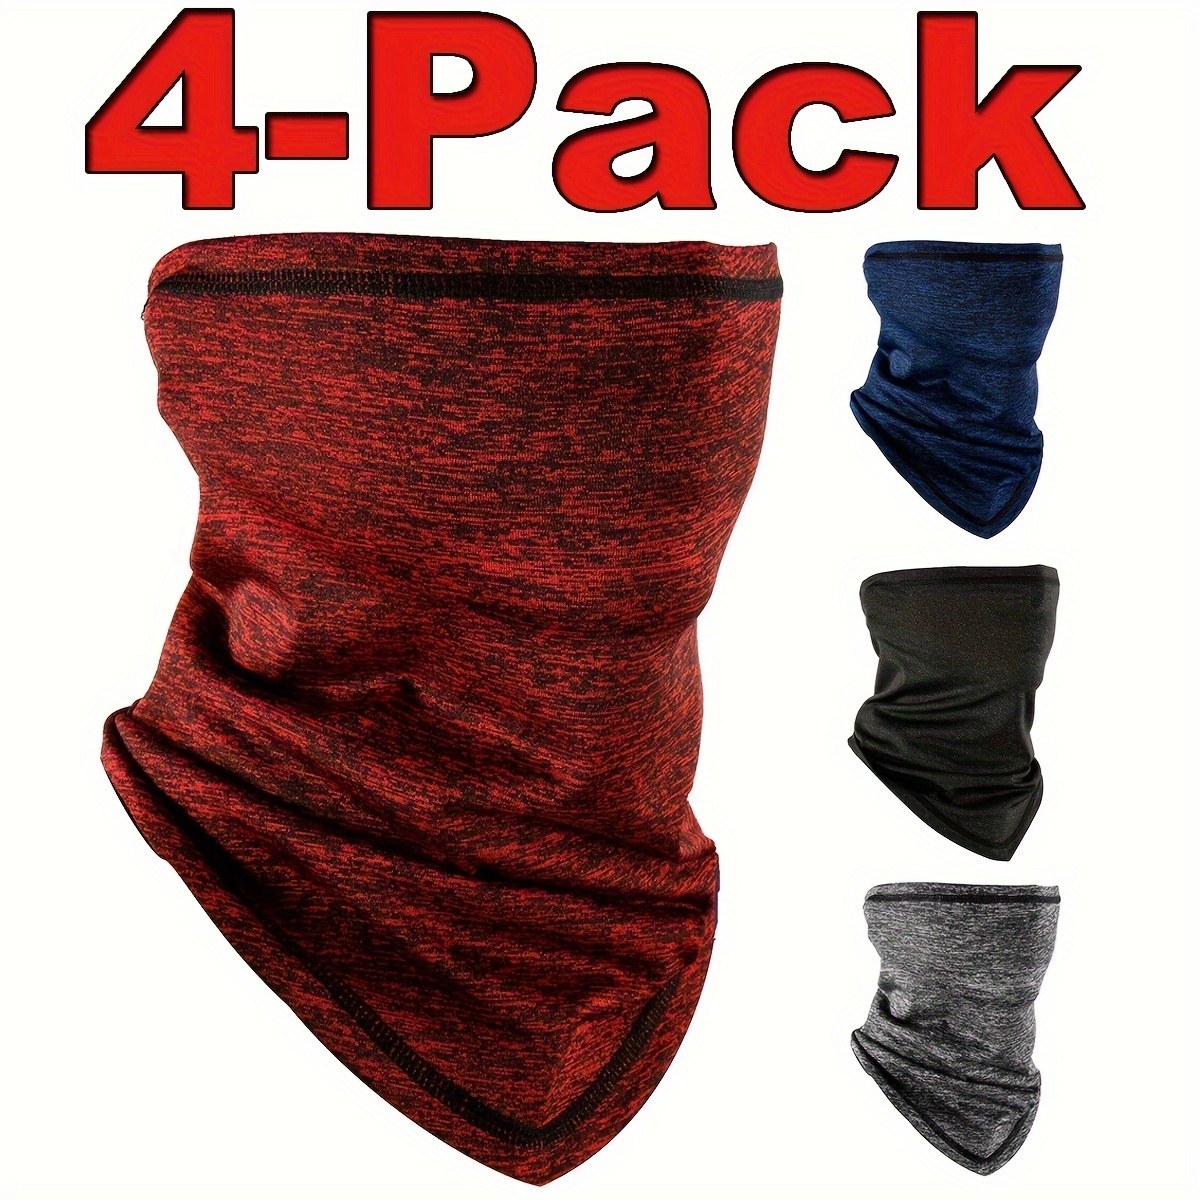 

4 Pieces Summer Cooling Neck Gaiter Face Clothing Neck Gaiter Scarf Sunscreen Breathable Bandana For Fishing Cycling Hiking